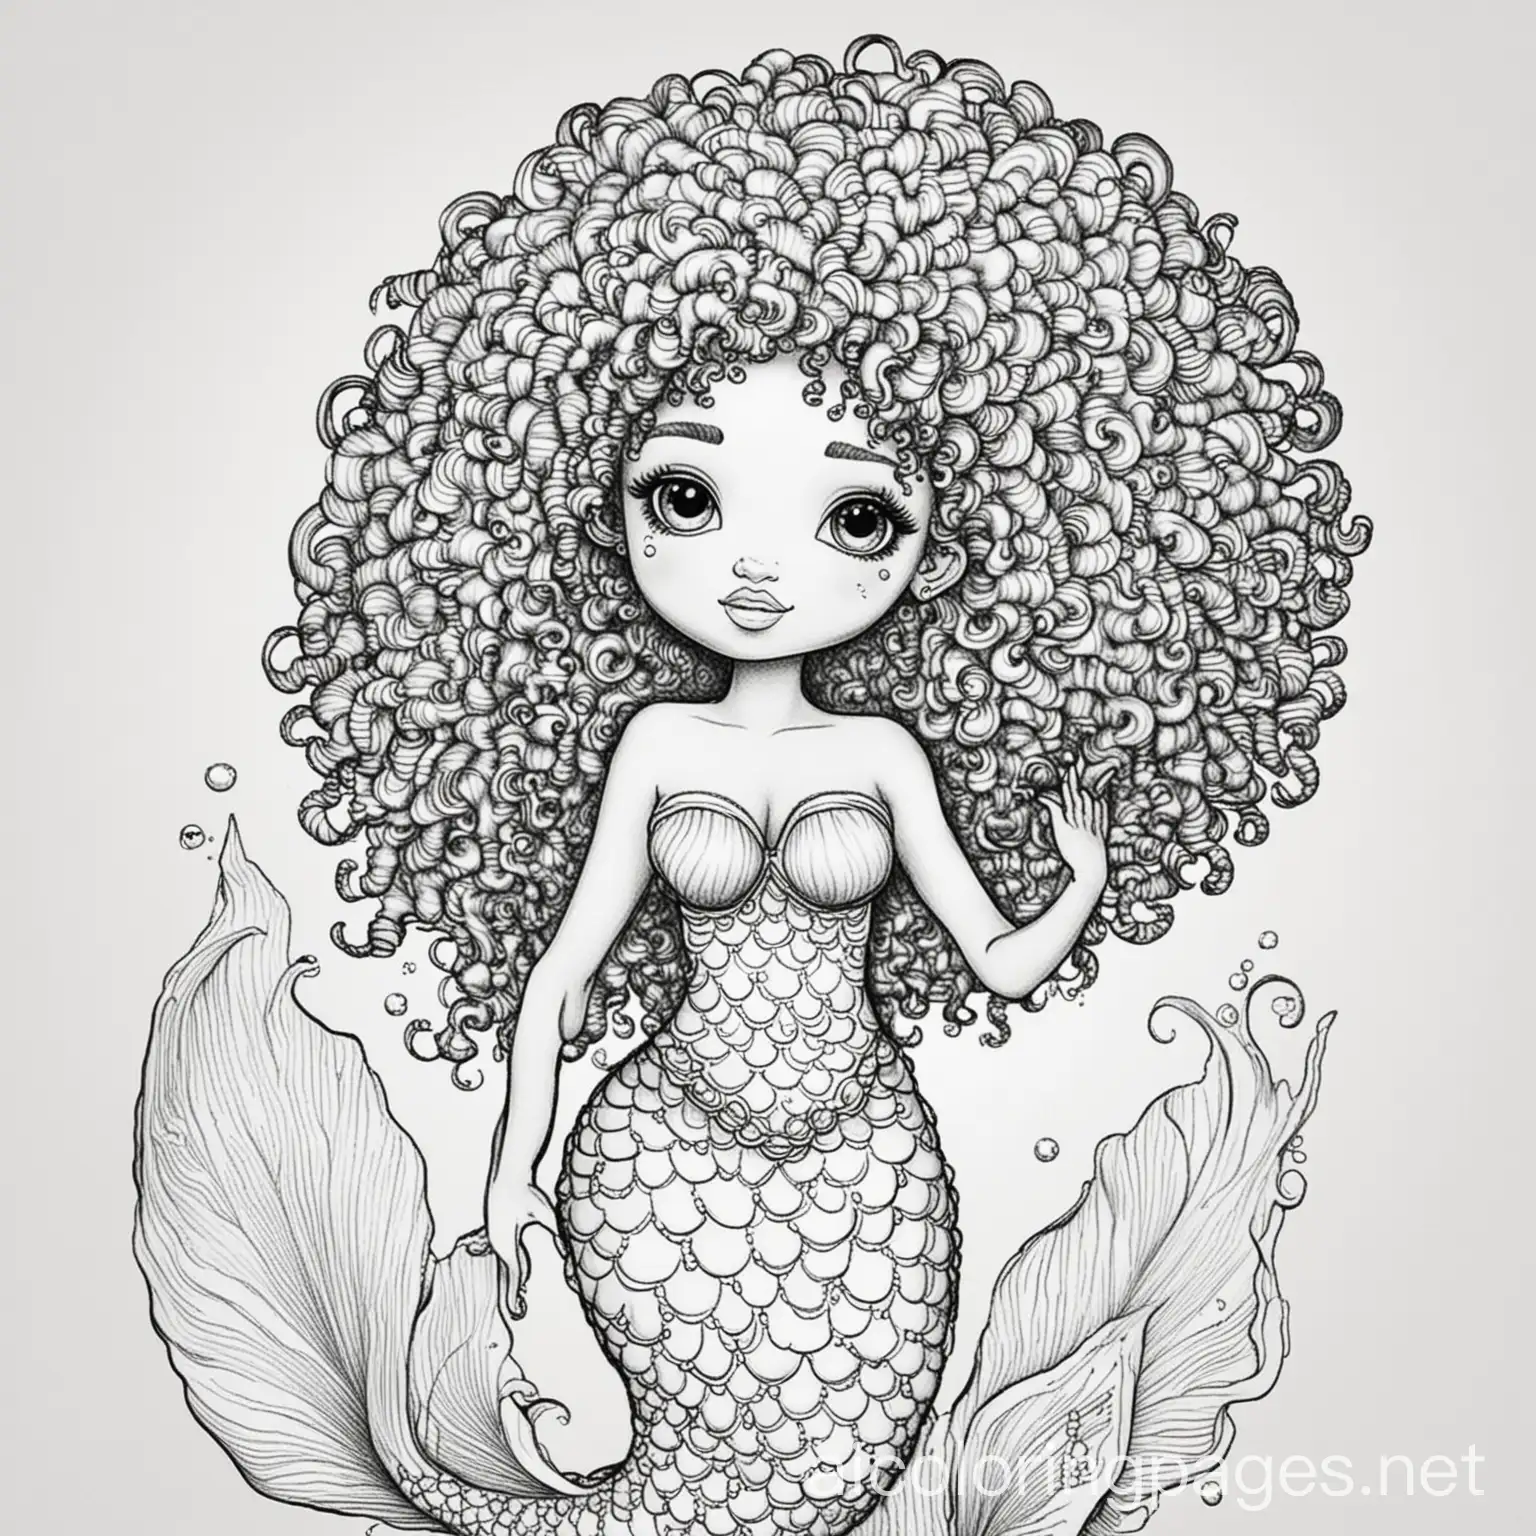 mermaid with an afro, Coloring Page, black and white, line art, white background, Simplicity, Ample White Space. The background of the coloring page is plain white to make it easy for young children to color within the lines. The outlines of all the subjects are easy to distinguish, making it simple for kids to color without too much difficulty